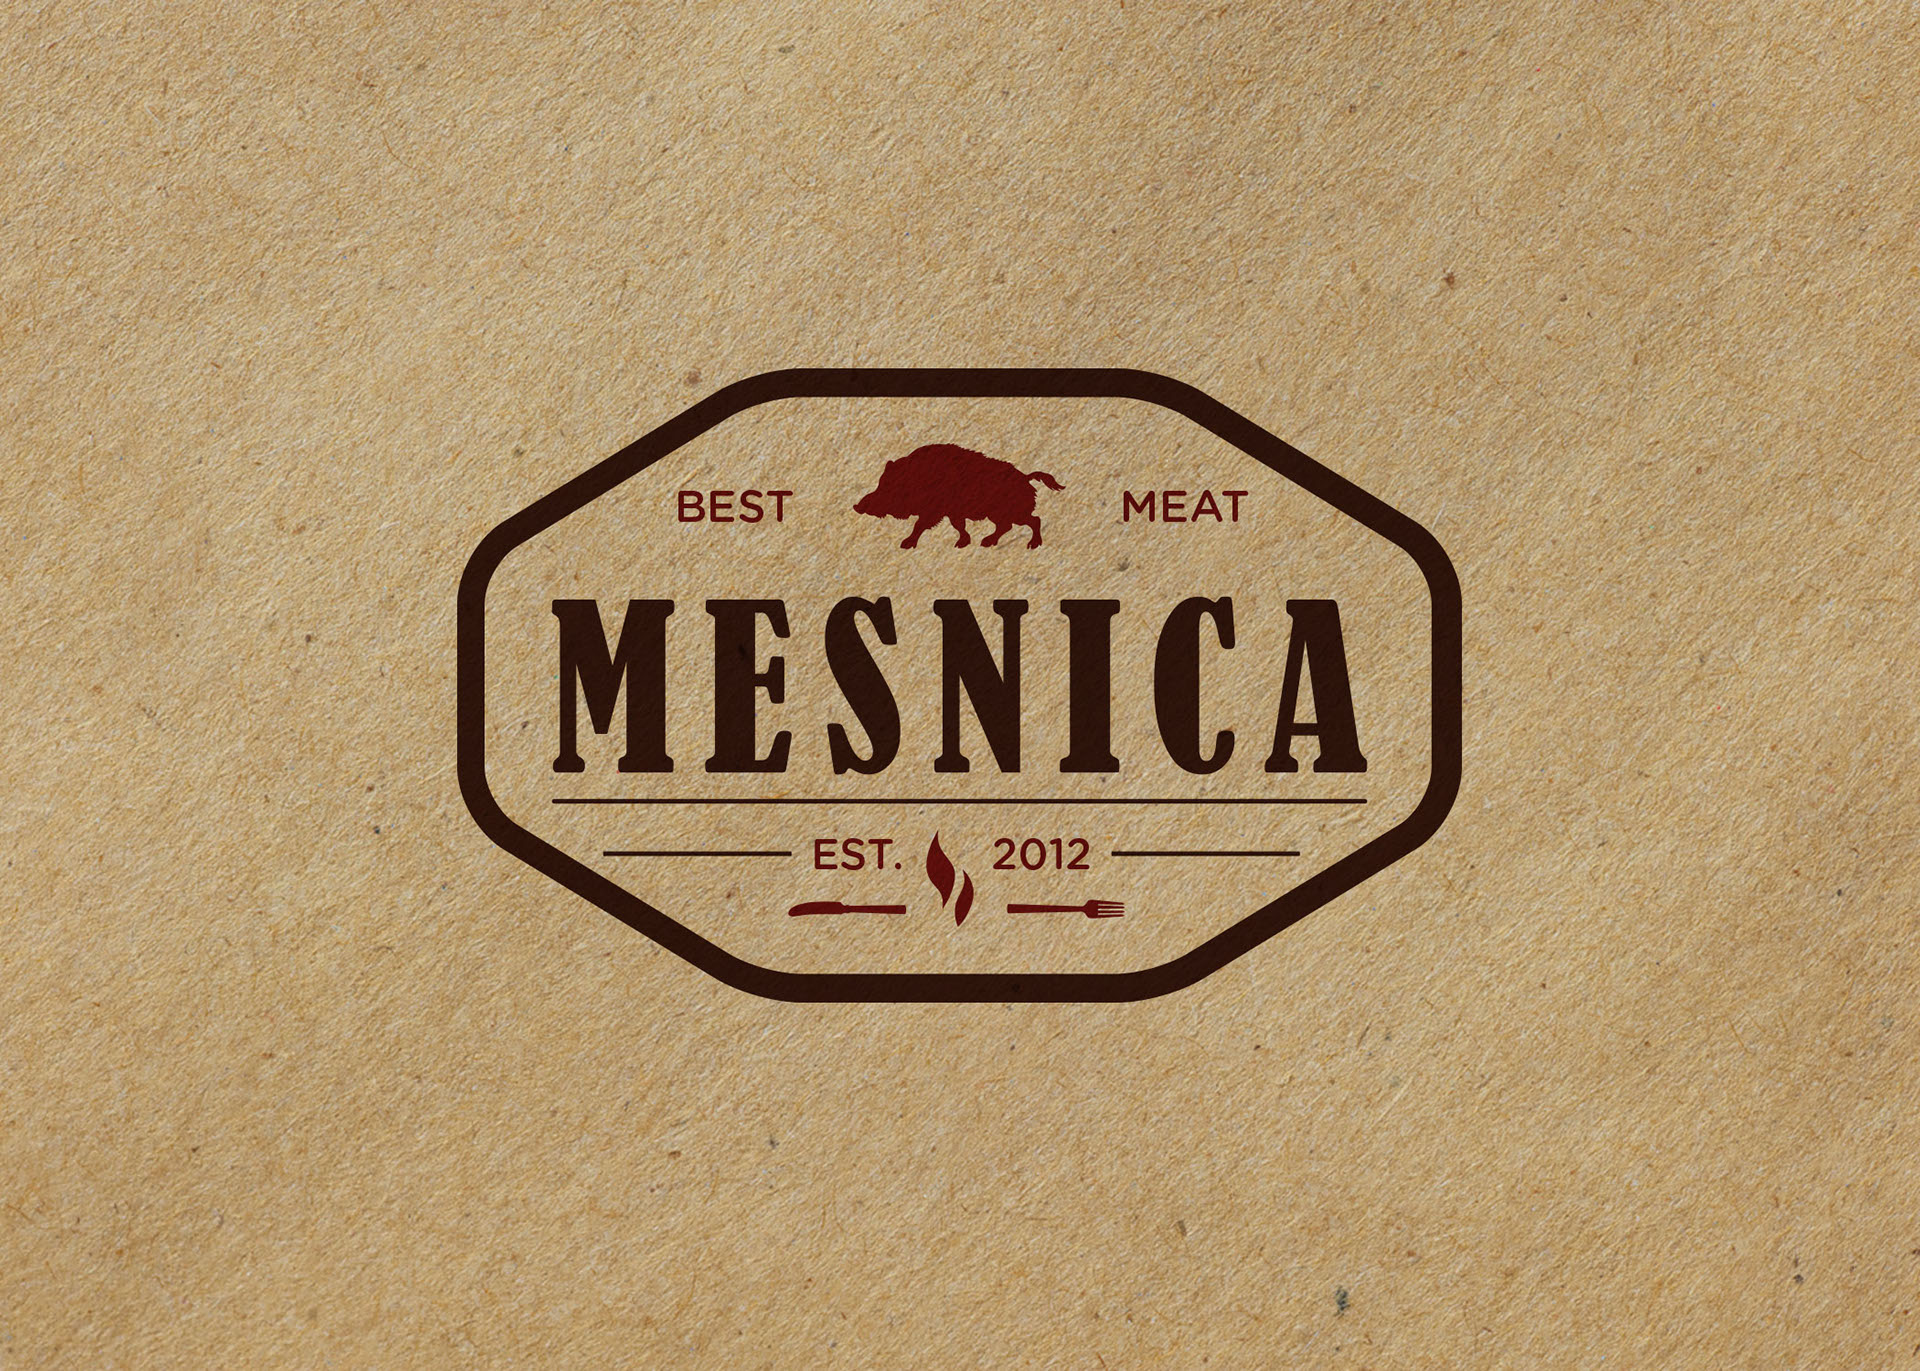 Meat game. Meat brand. Meat brand logo.